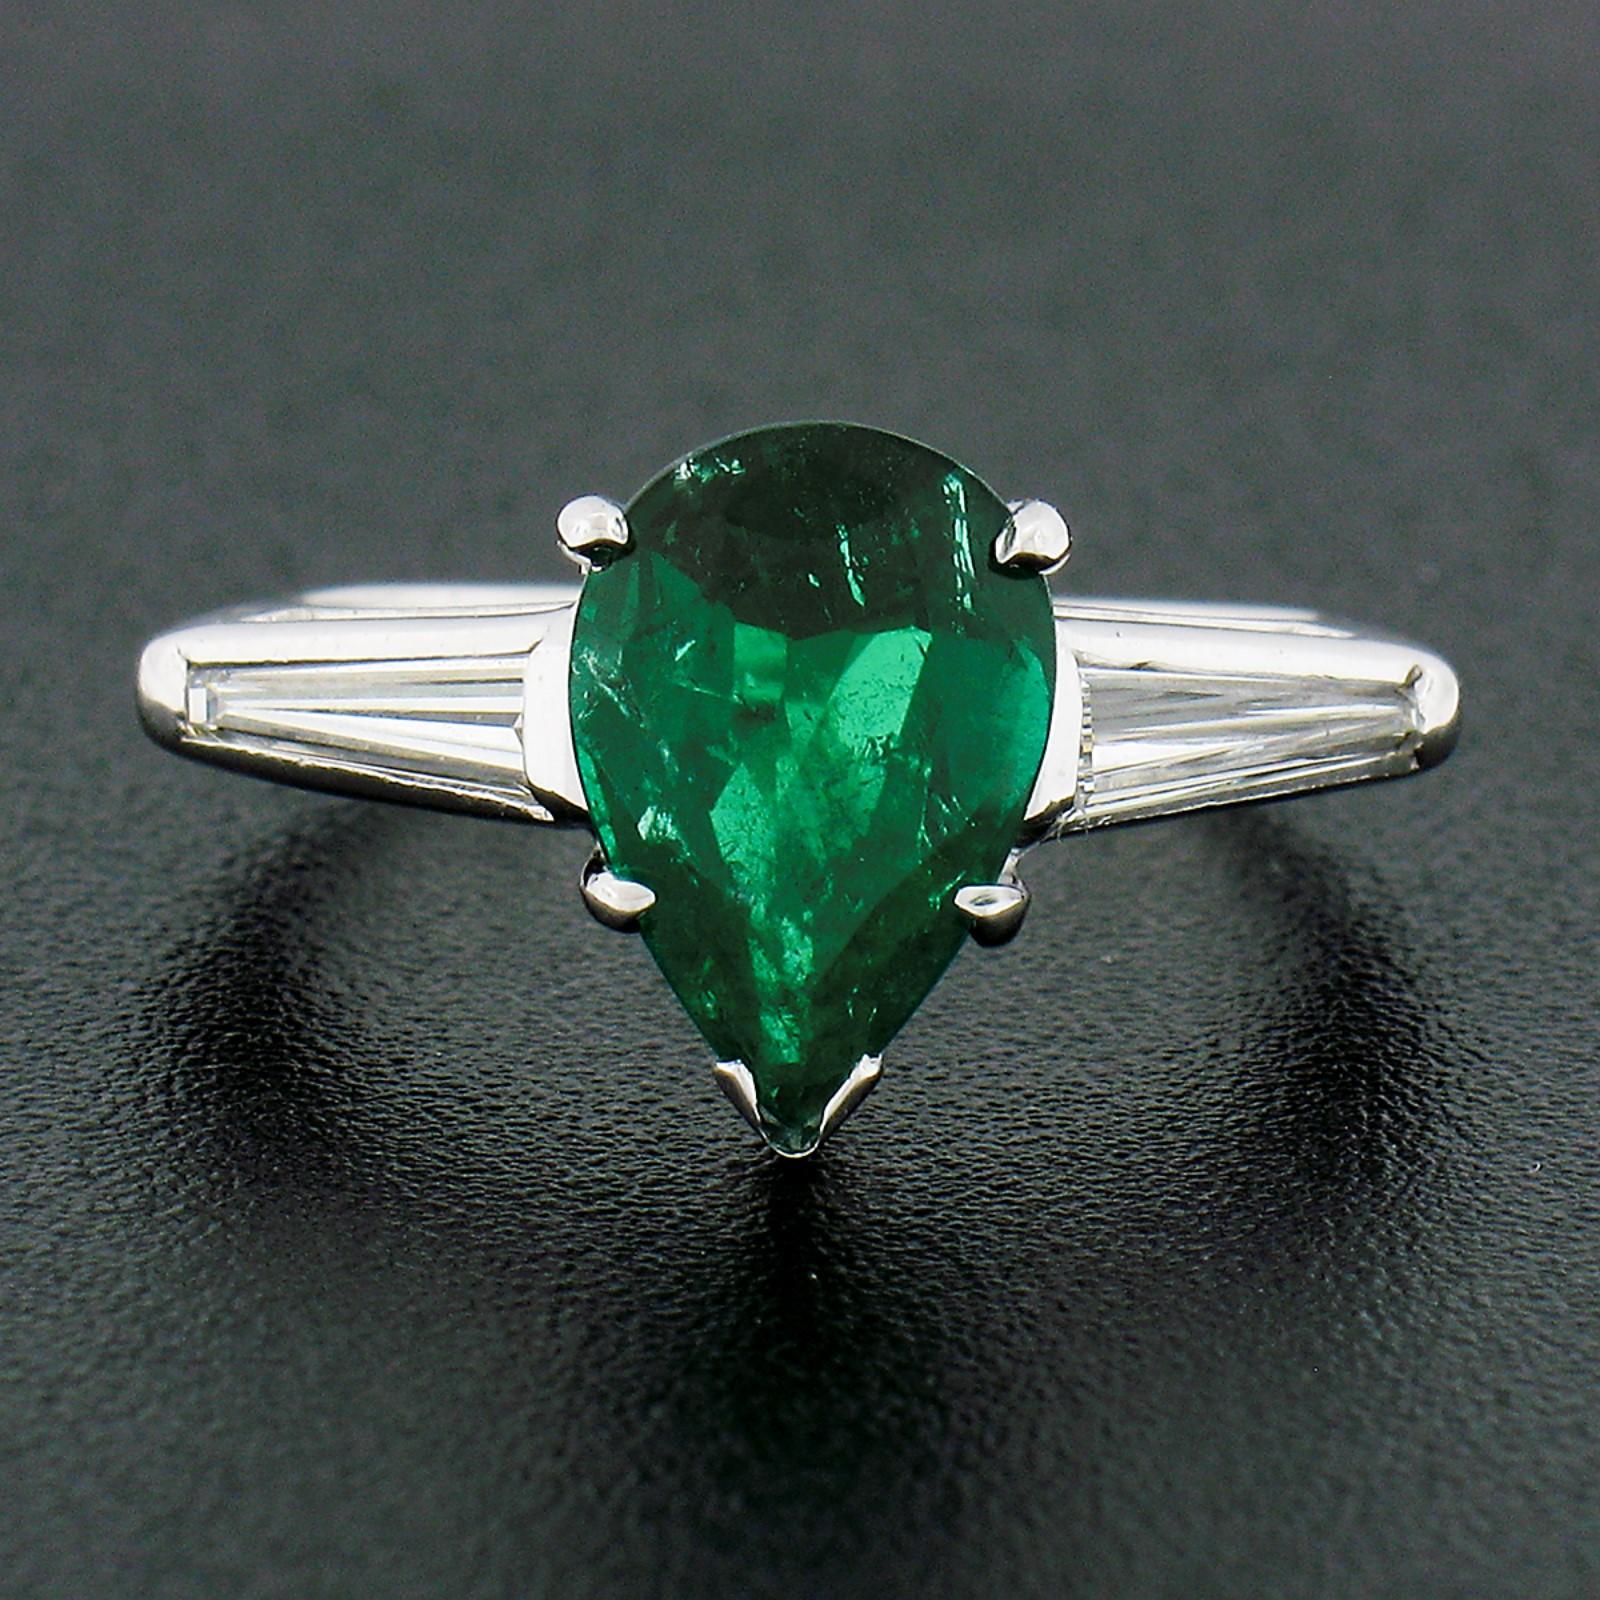 This stunning vintage ring is crafted from solid platinum and features an, SSEF certified, natural emerald and diamond three-stone design. The breathtaking pear cut emerald displays the finest and most desirable rich and deep green color and is very